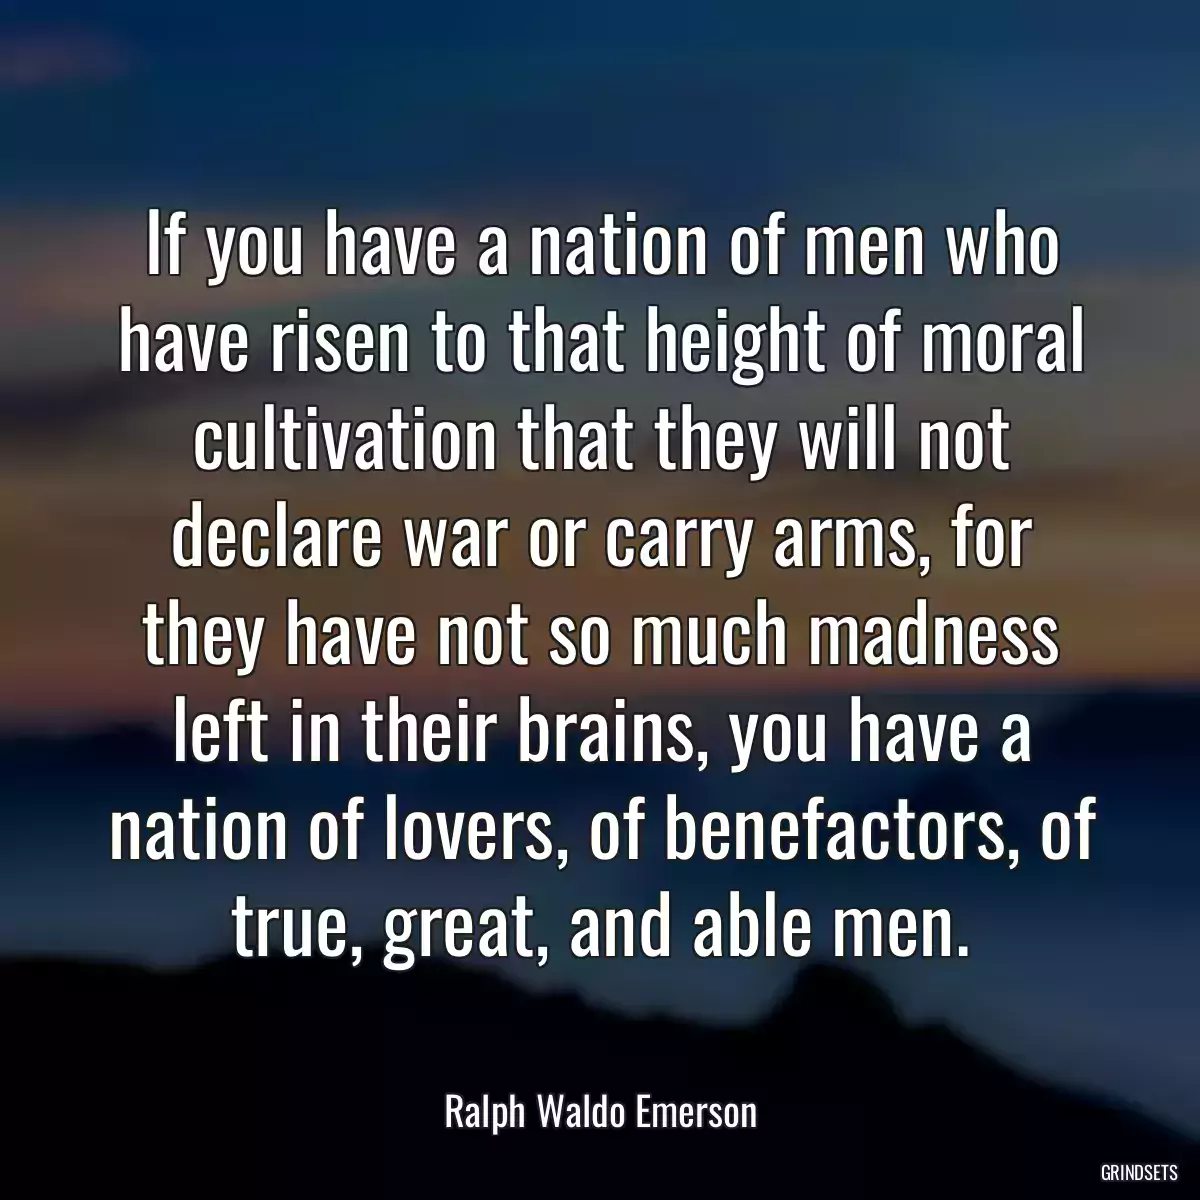 If you have a nation of men who have risen to that height of moral cultivation that they will not declare war or carry arms, for they have not so much madness left in their brains, you have a nation of lovers, of benefactors, of true, great, and able men.